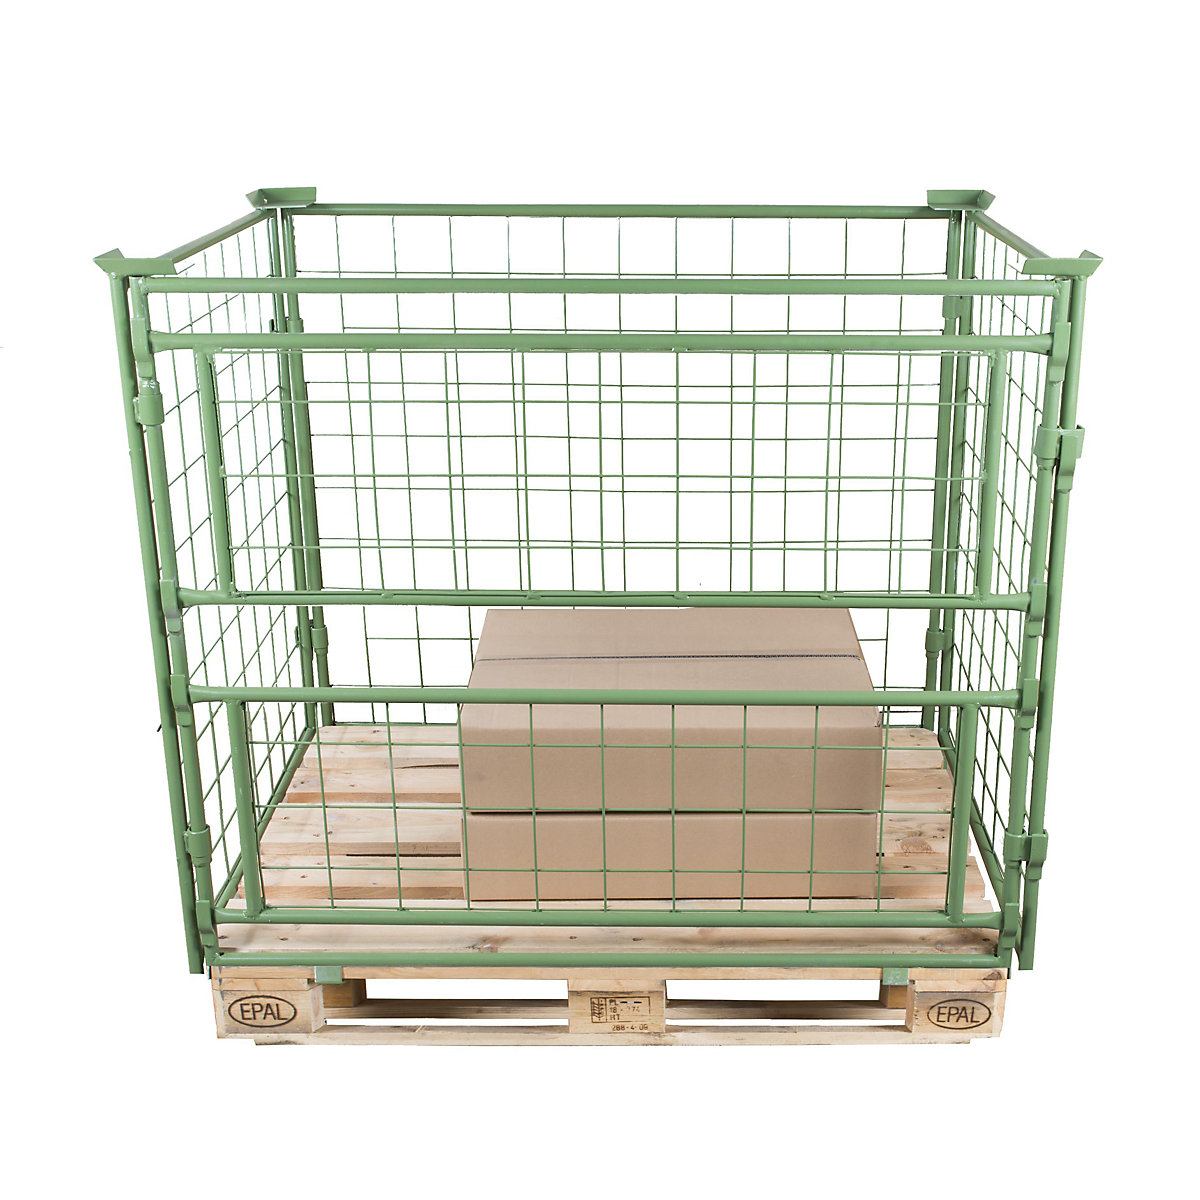 Pallet frame, effective height 800 mm, for stacking, WxL 800 x 1200 mm, 1 long side with 2 parts, removable-2